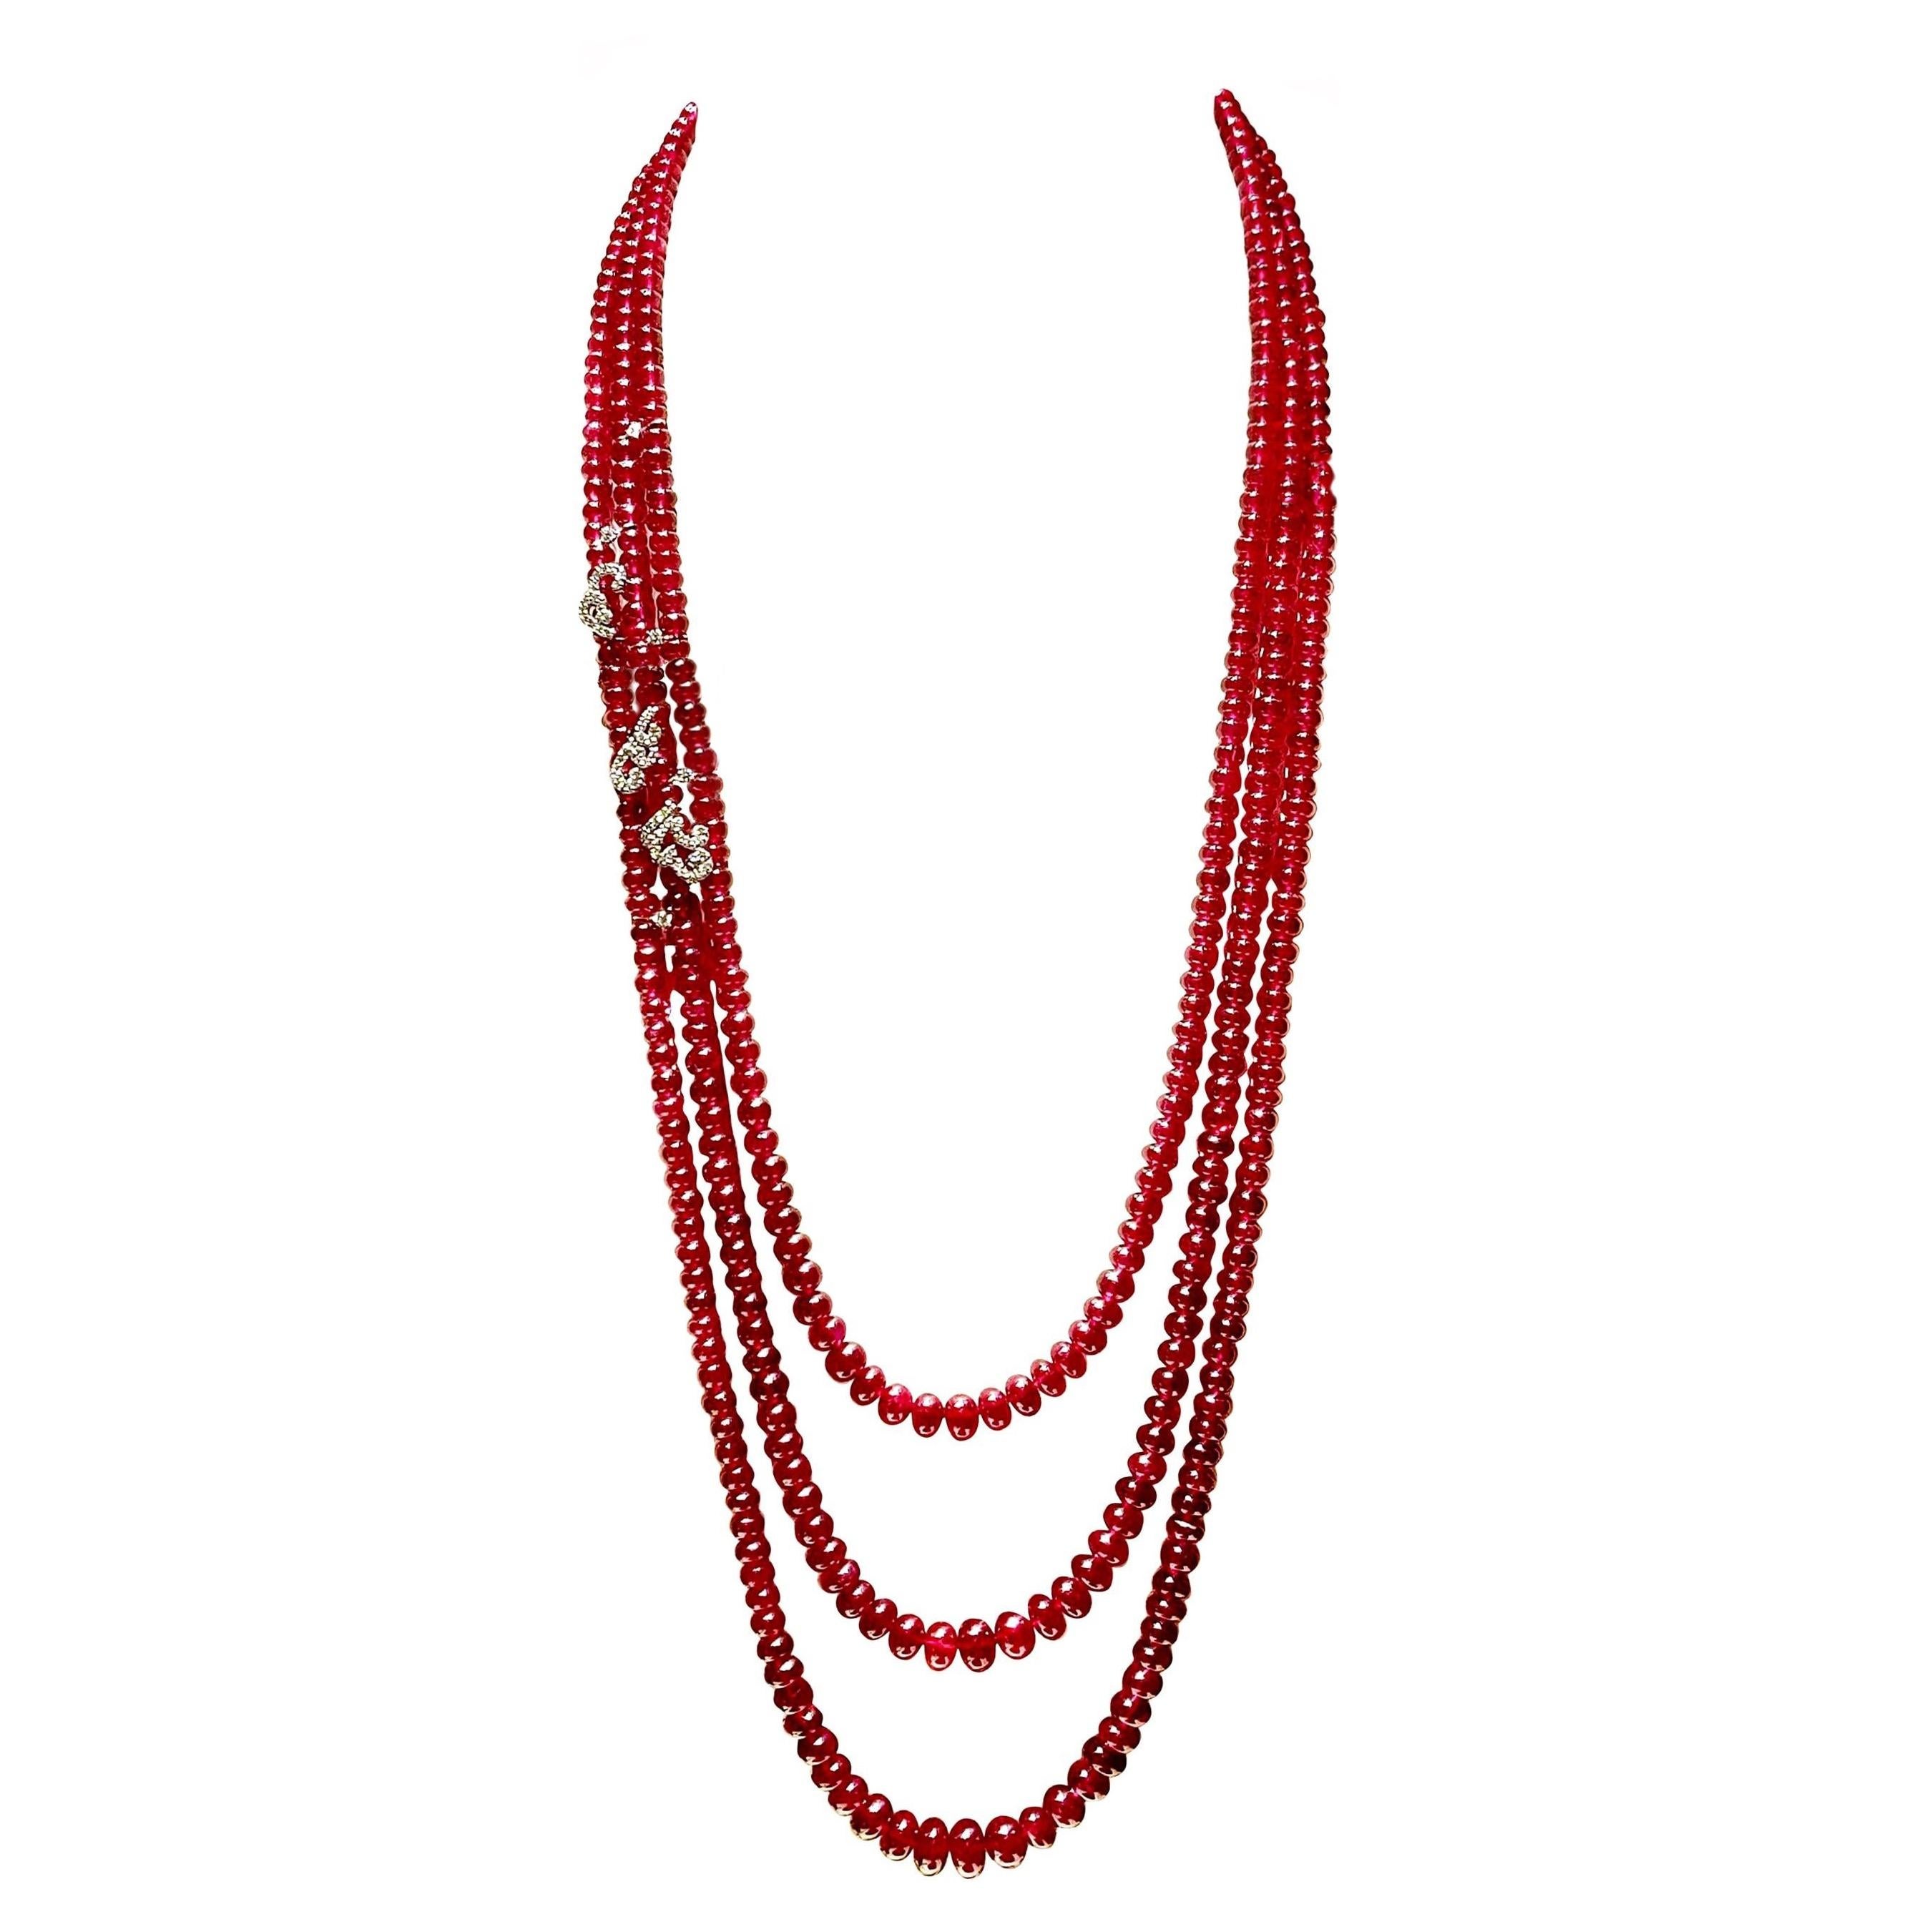 ---------------------------------------
         BESPOKE PIECE
---------------------------------------

Triple Strand Ruby Bead Necklace with Scattering Diamond 18K White Gold Curled Petals and Pollens

Gold: 18K White Gold, approx. 9 g
Diamond: